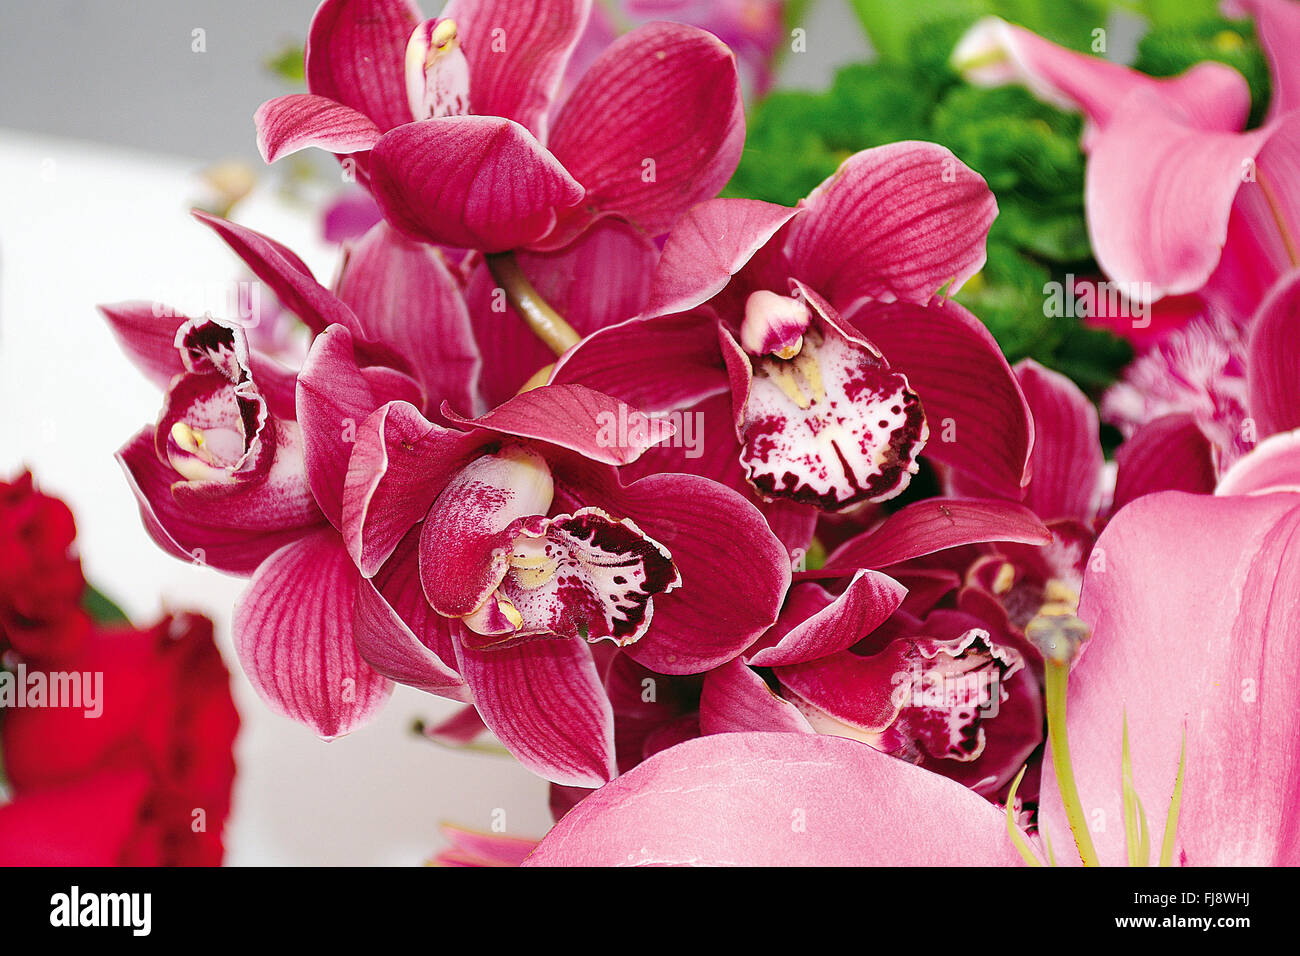 Slipper orchid, india, asia Stock Photo